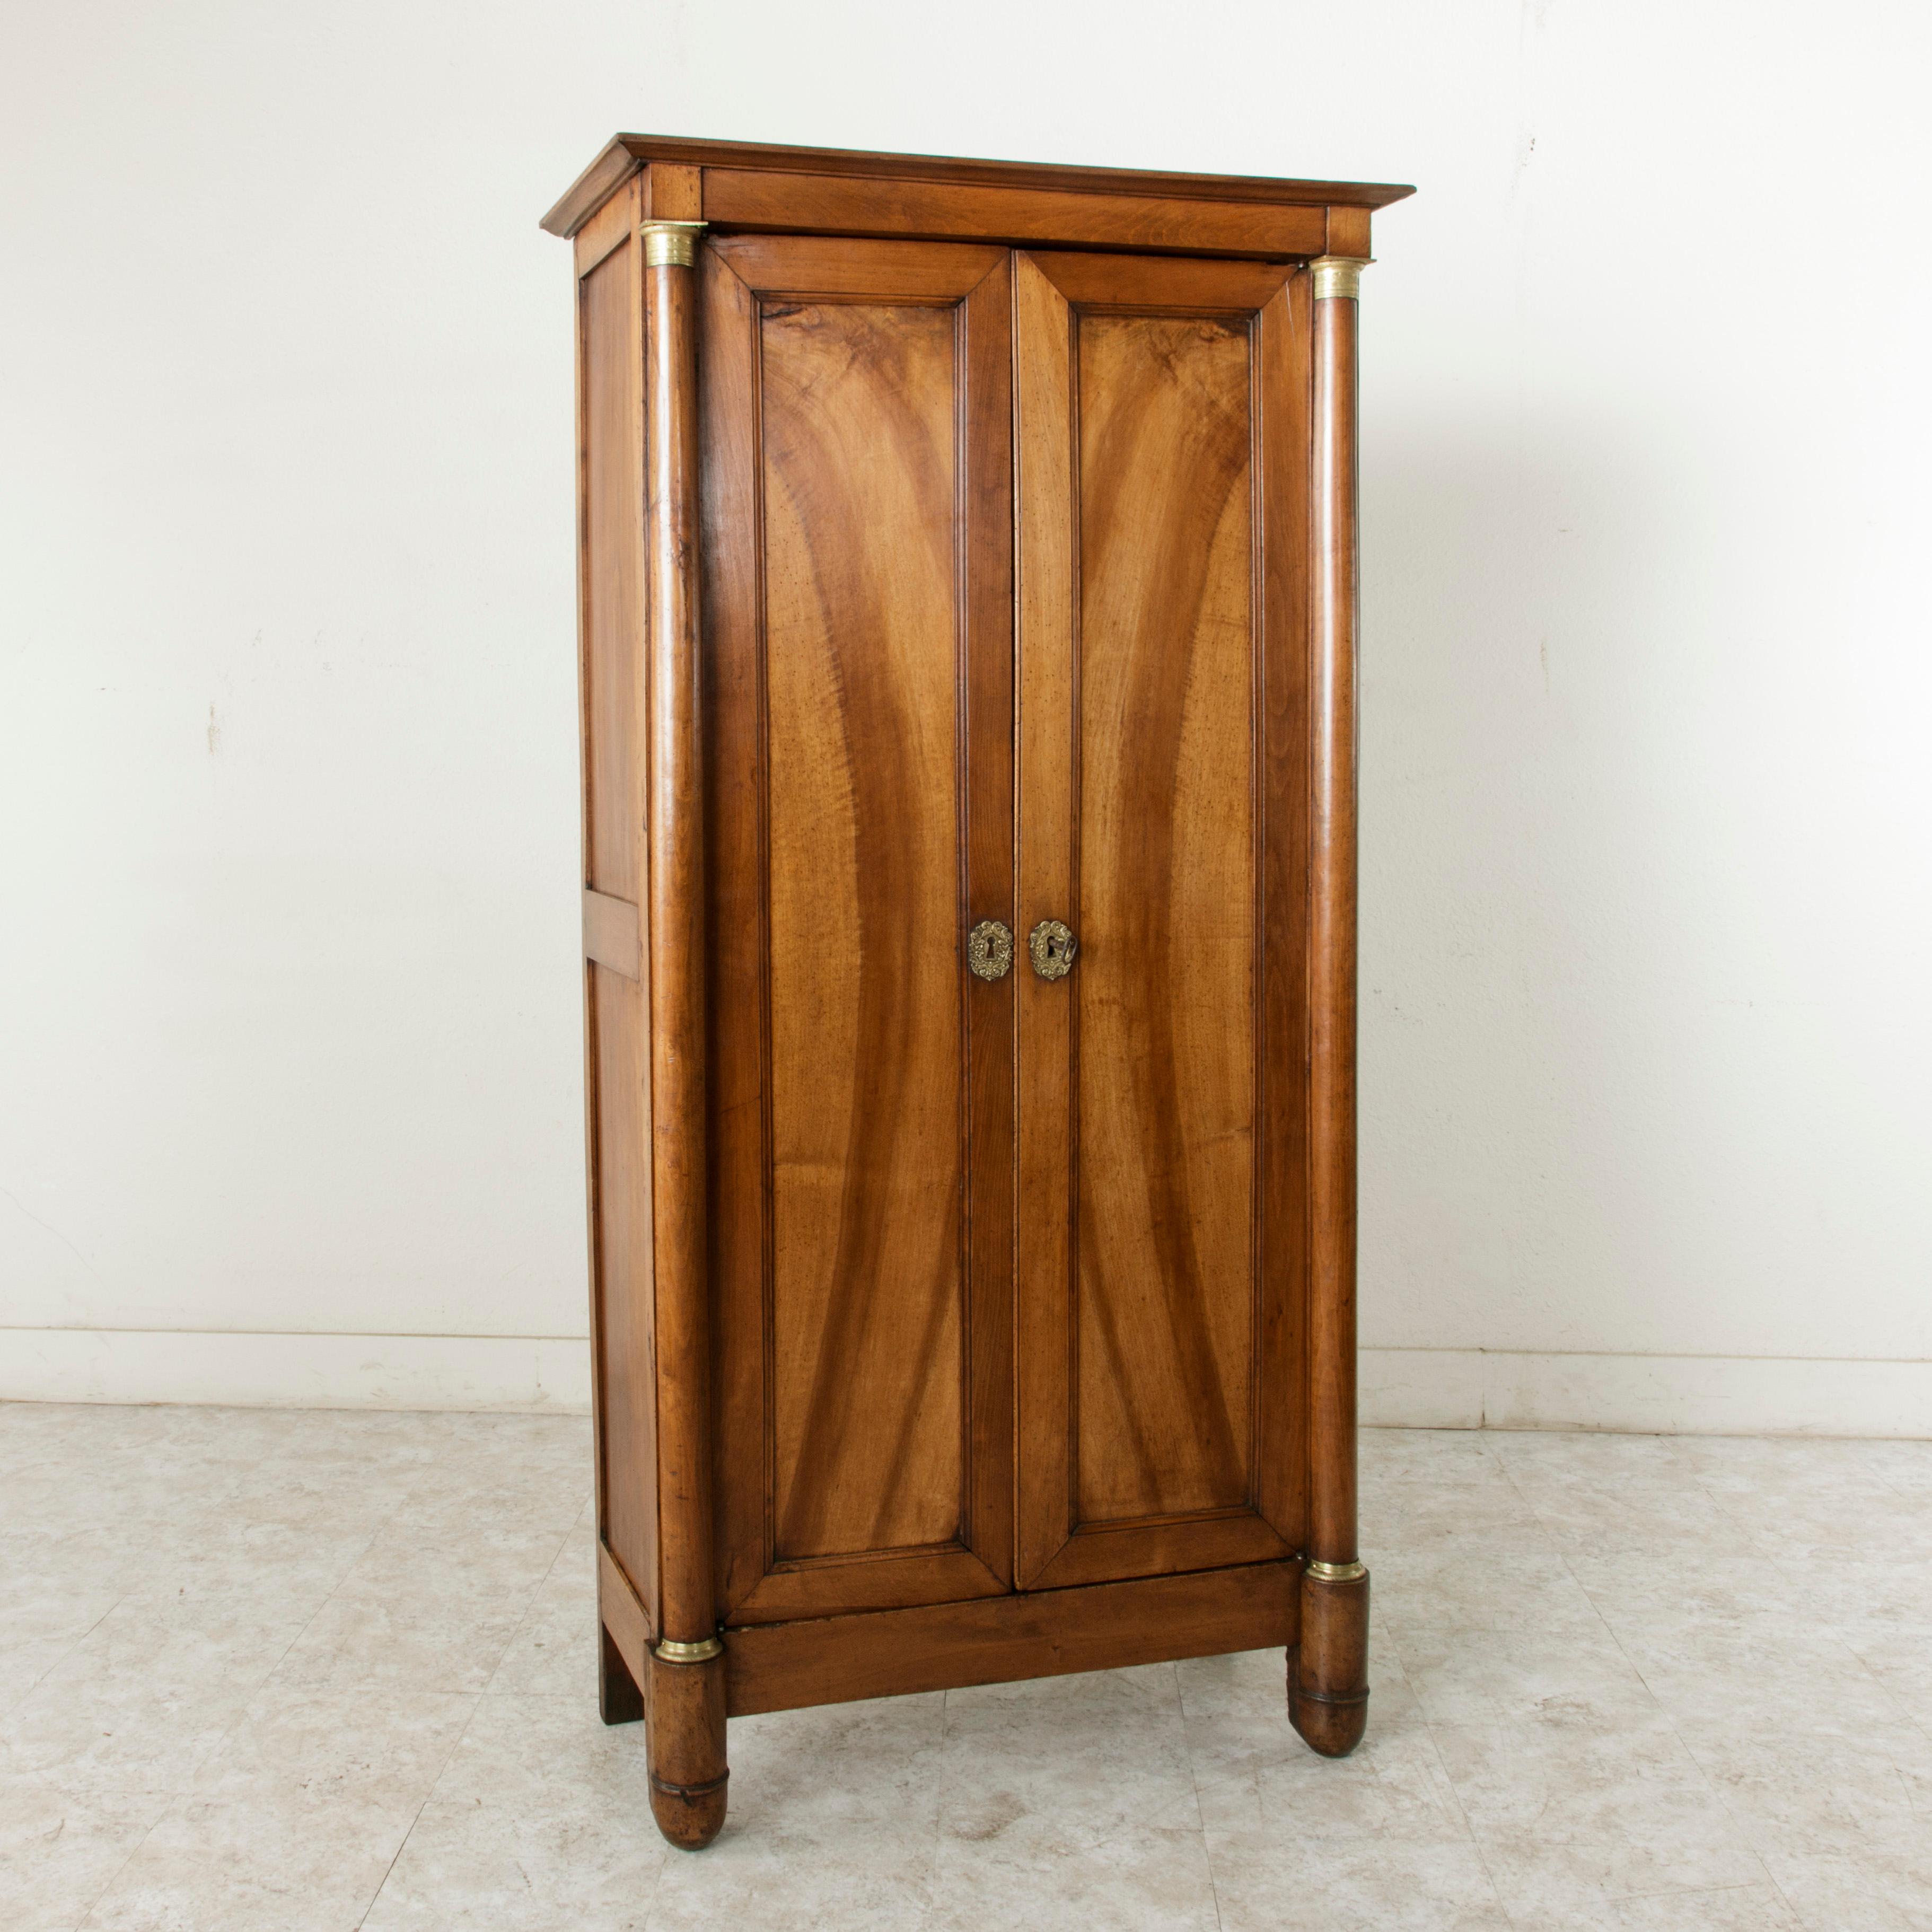 This small scale walnut French Empire period armoire or armoirette features double doors flanked by half columns that are fitted with chased bronzes at the bases and capitals. Bronze escutcheons detailed with an acanthus leaf motif appoint the